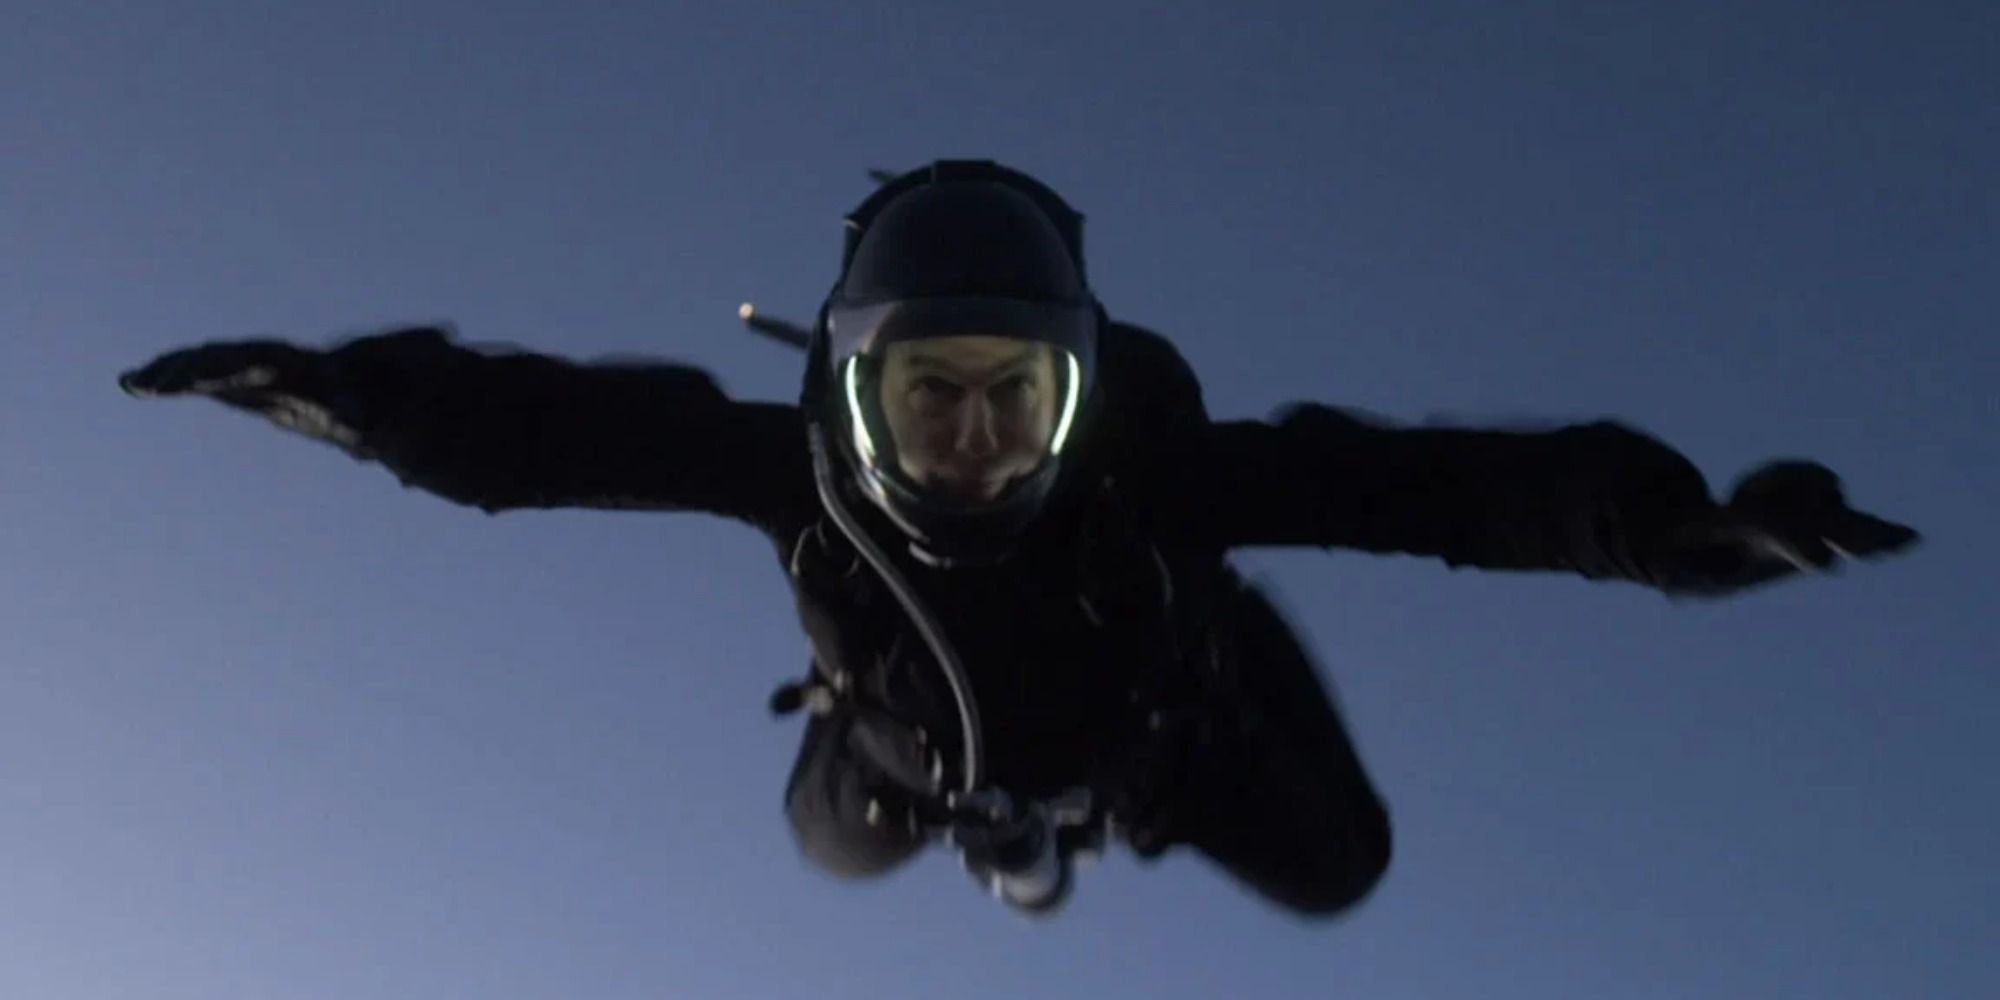 Ethan Hunt jumps from a plane wearing a parachute suit and free falls.